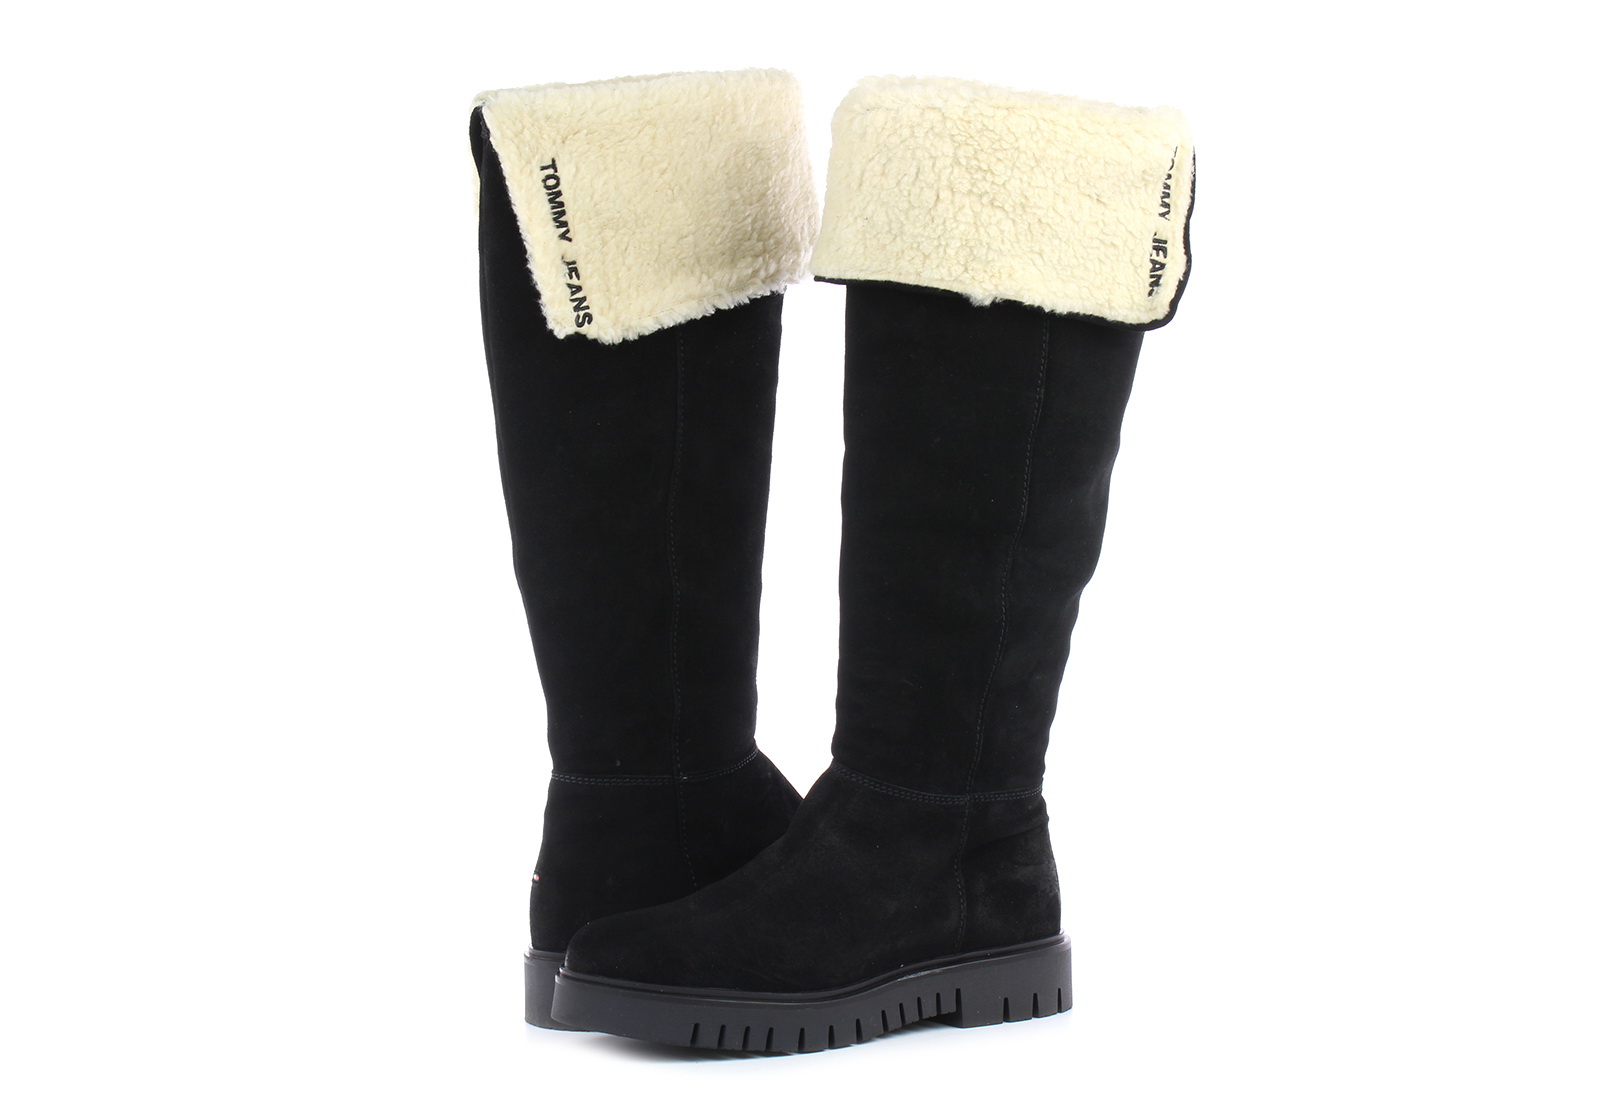 spoel Slank Groenland Tommy Hilfiger Tall boots - Yvonne 11bw - EN0-1074-BDS - Online shop for  sneakers, shoes and boots